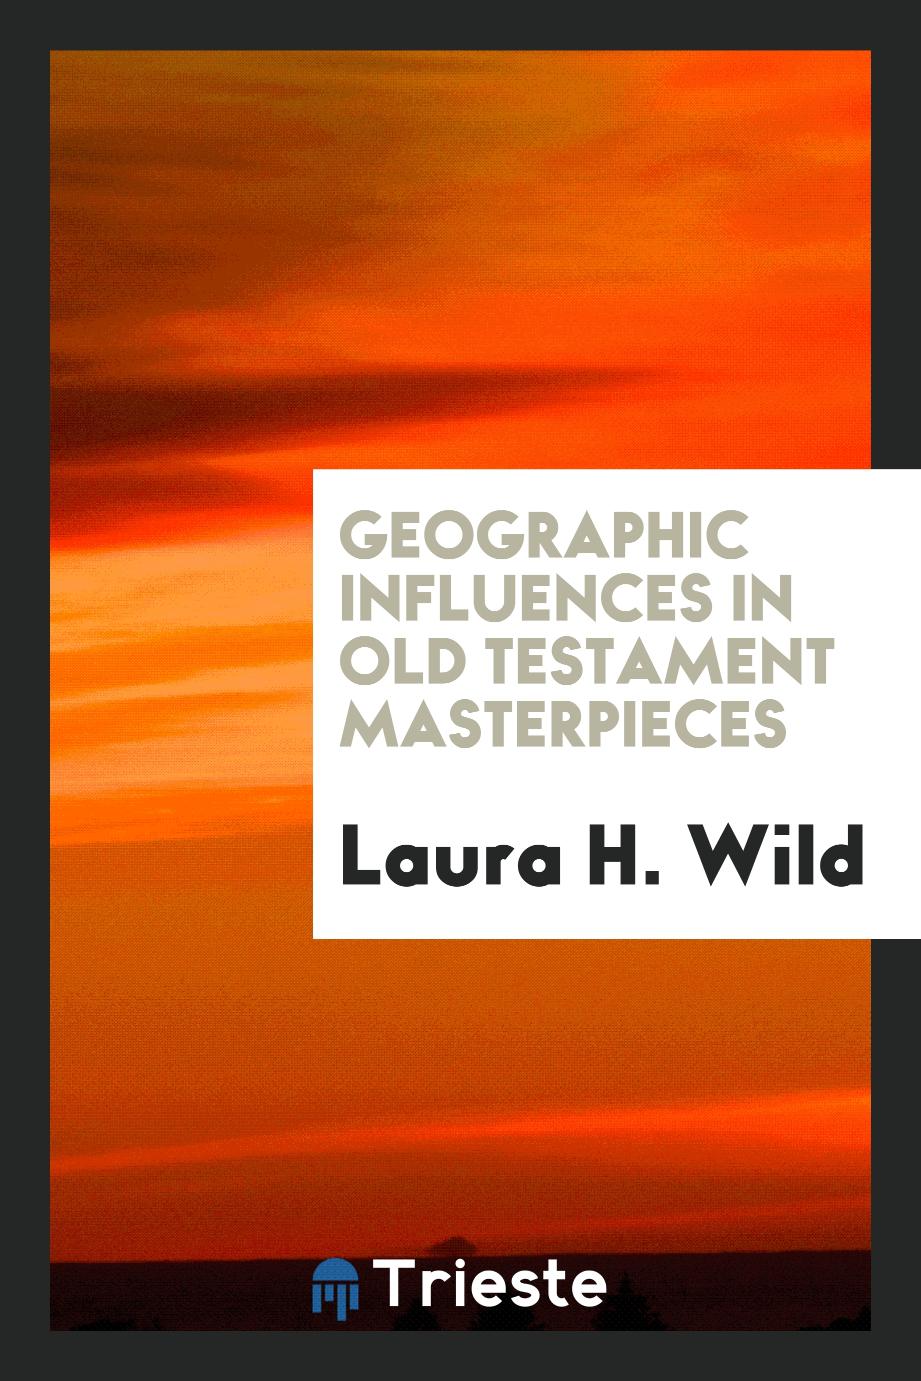 Geographic influences in Old Testament masterpieces